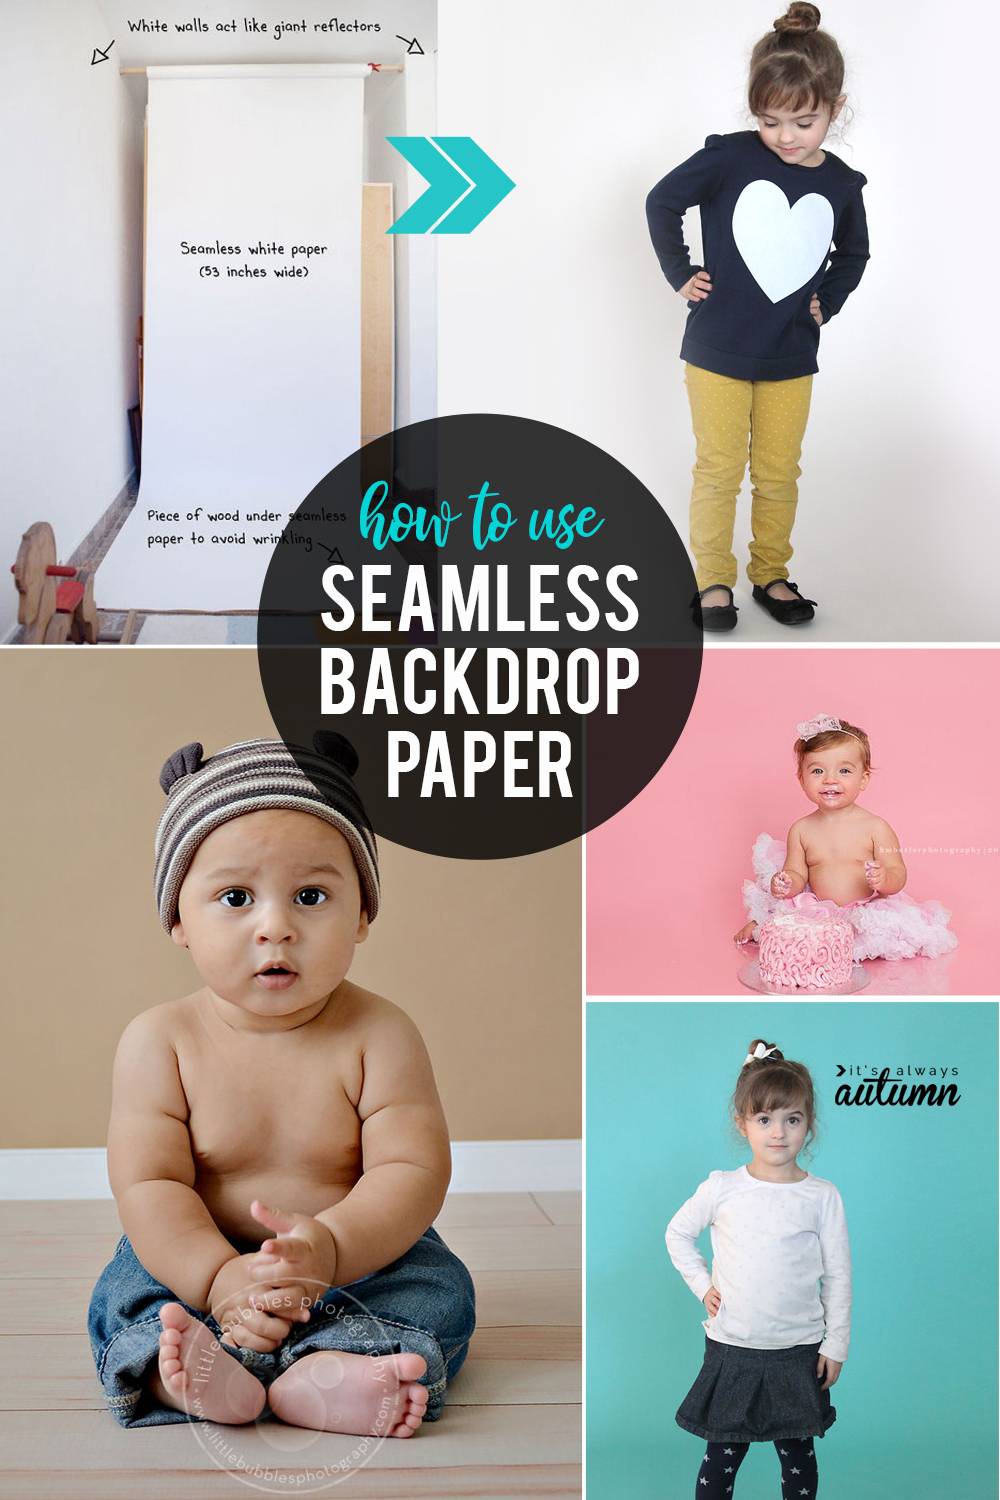 How to use seamless backdrop paper for beautiful, professional looking photos at home.